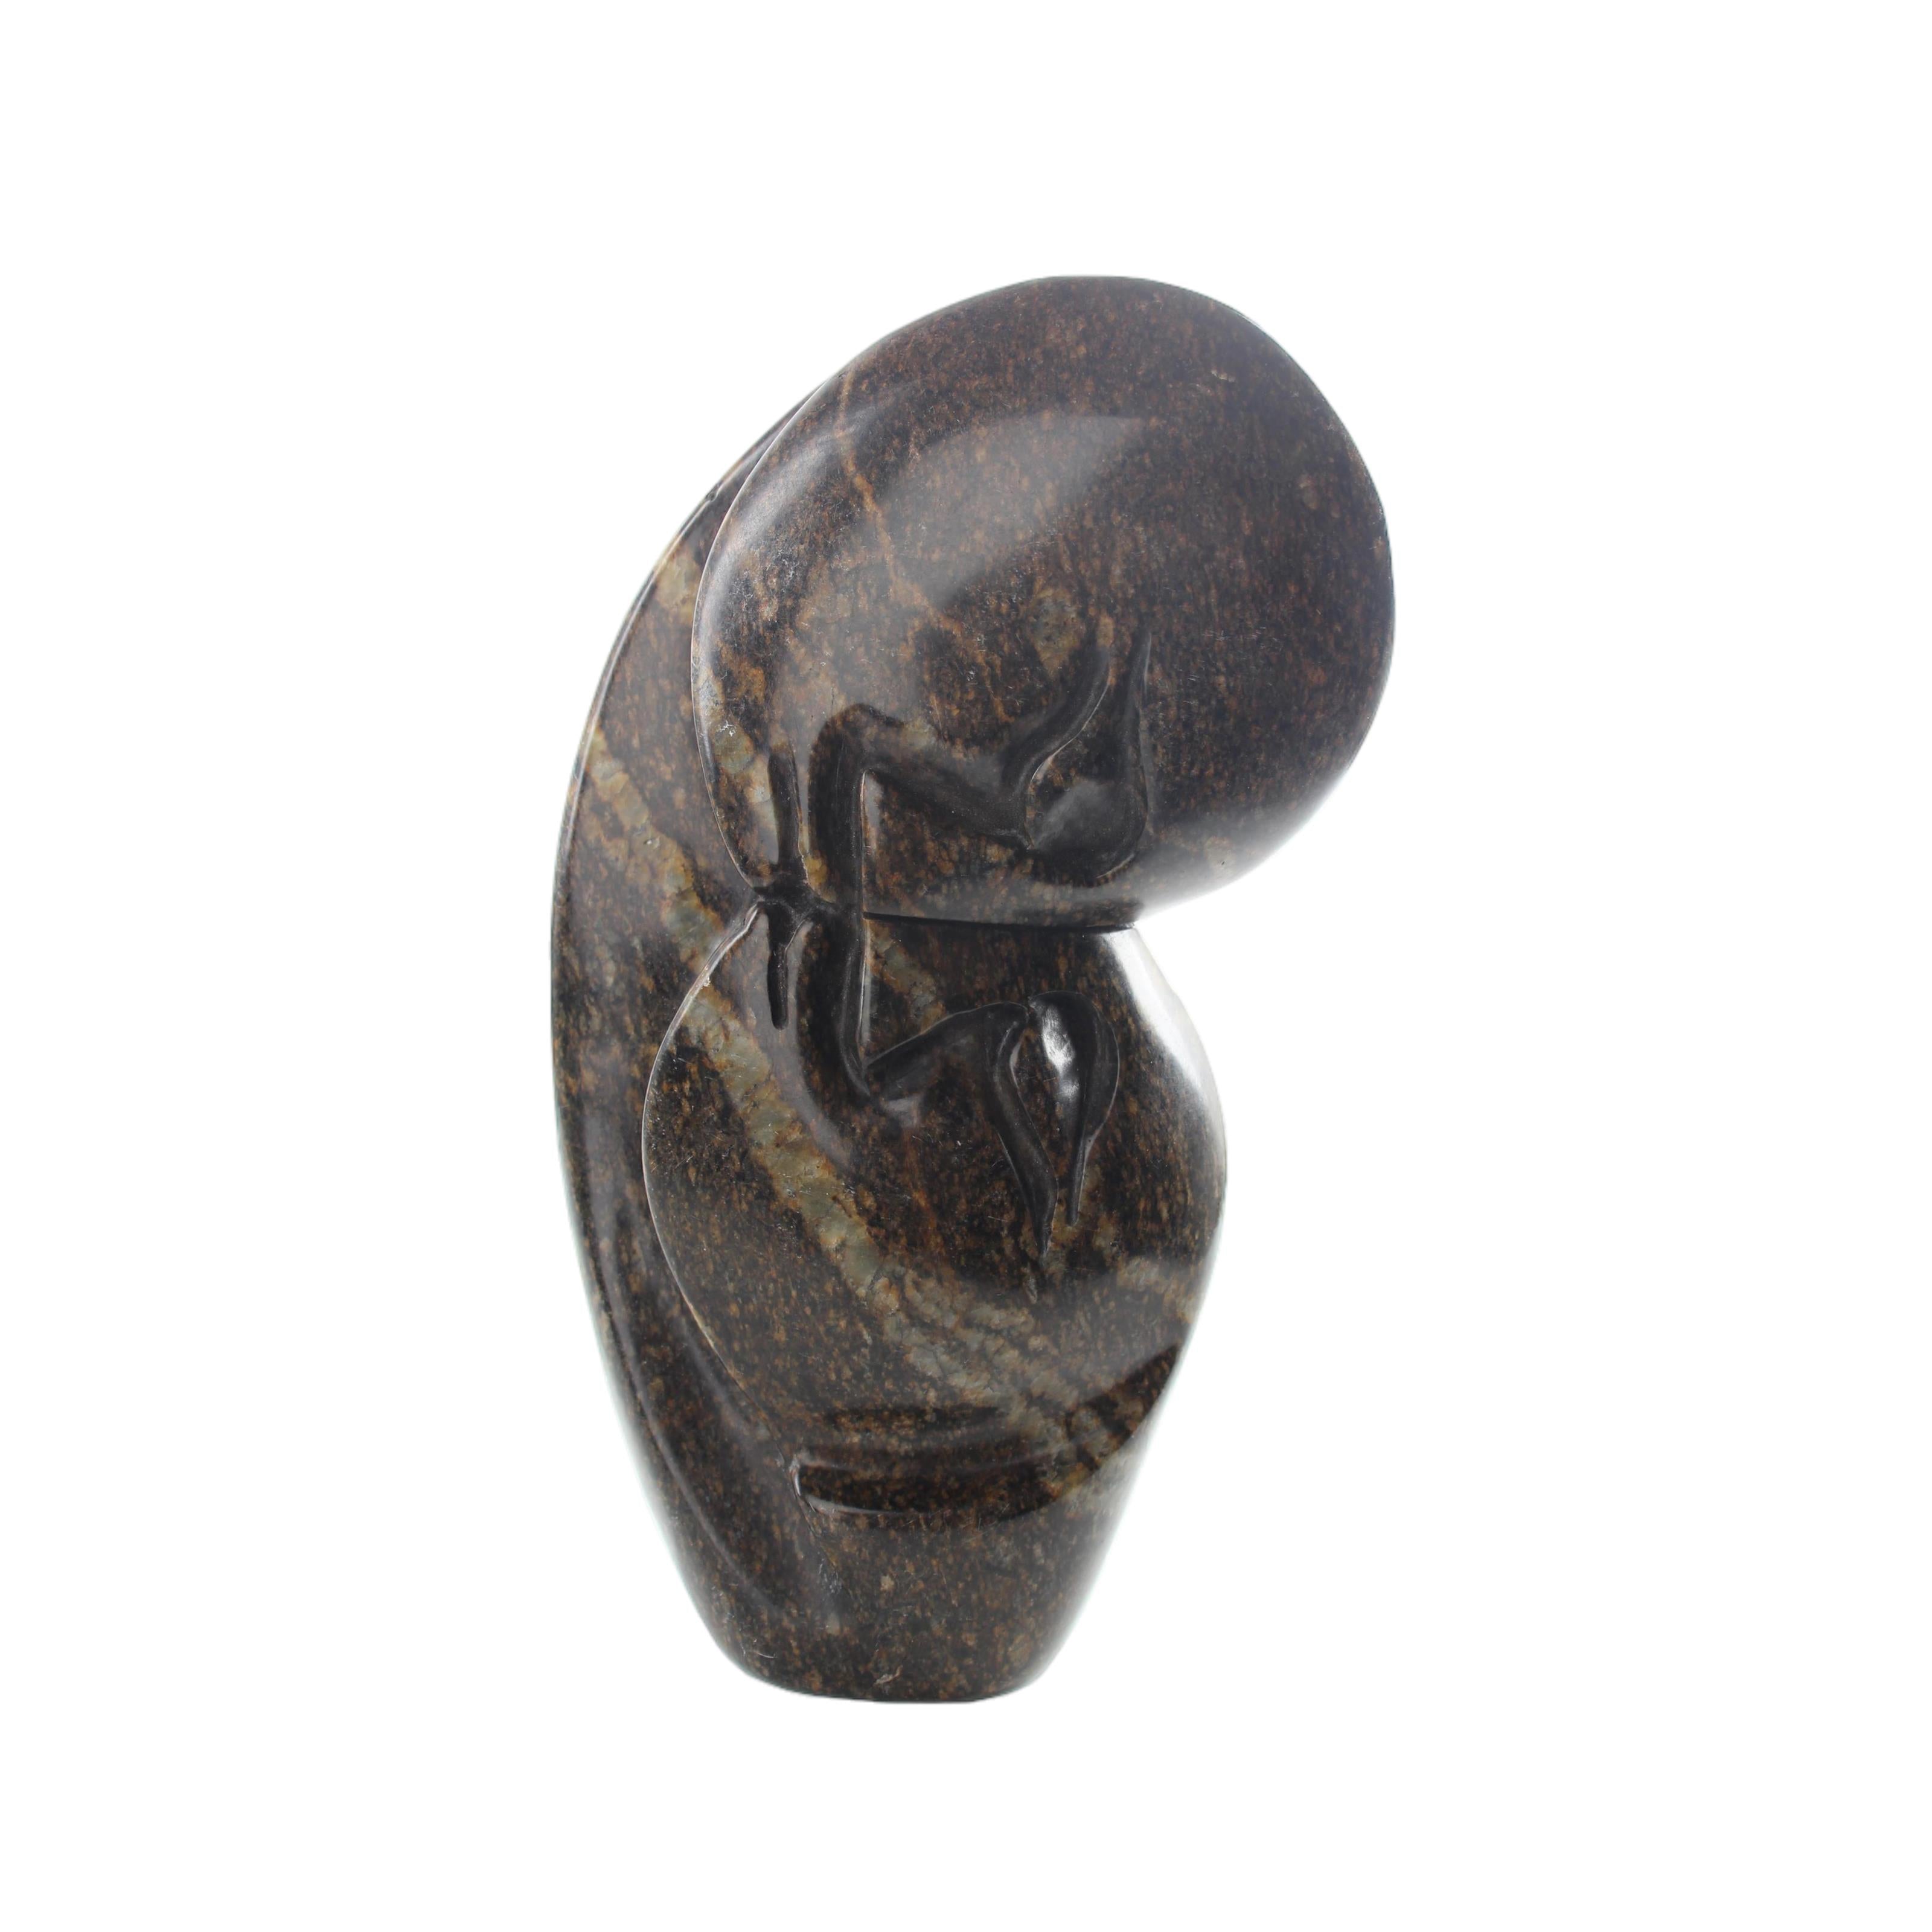 Shona Tribe Serpentine Stone Lovers ~8.3" Tall - Lovers